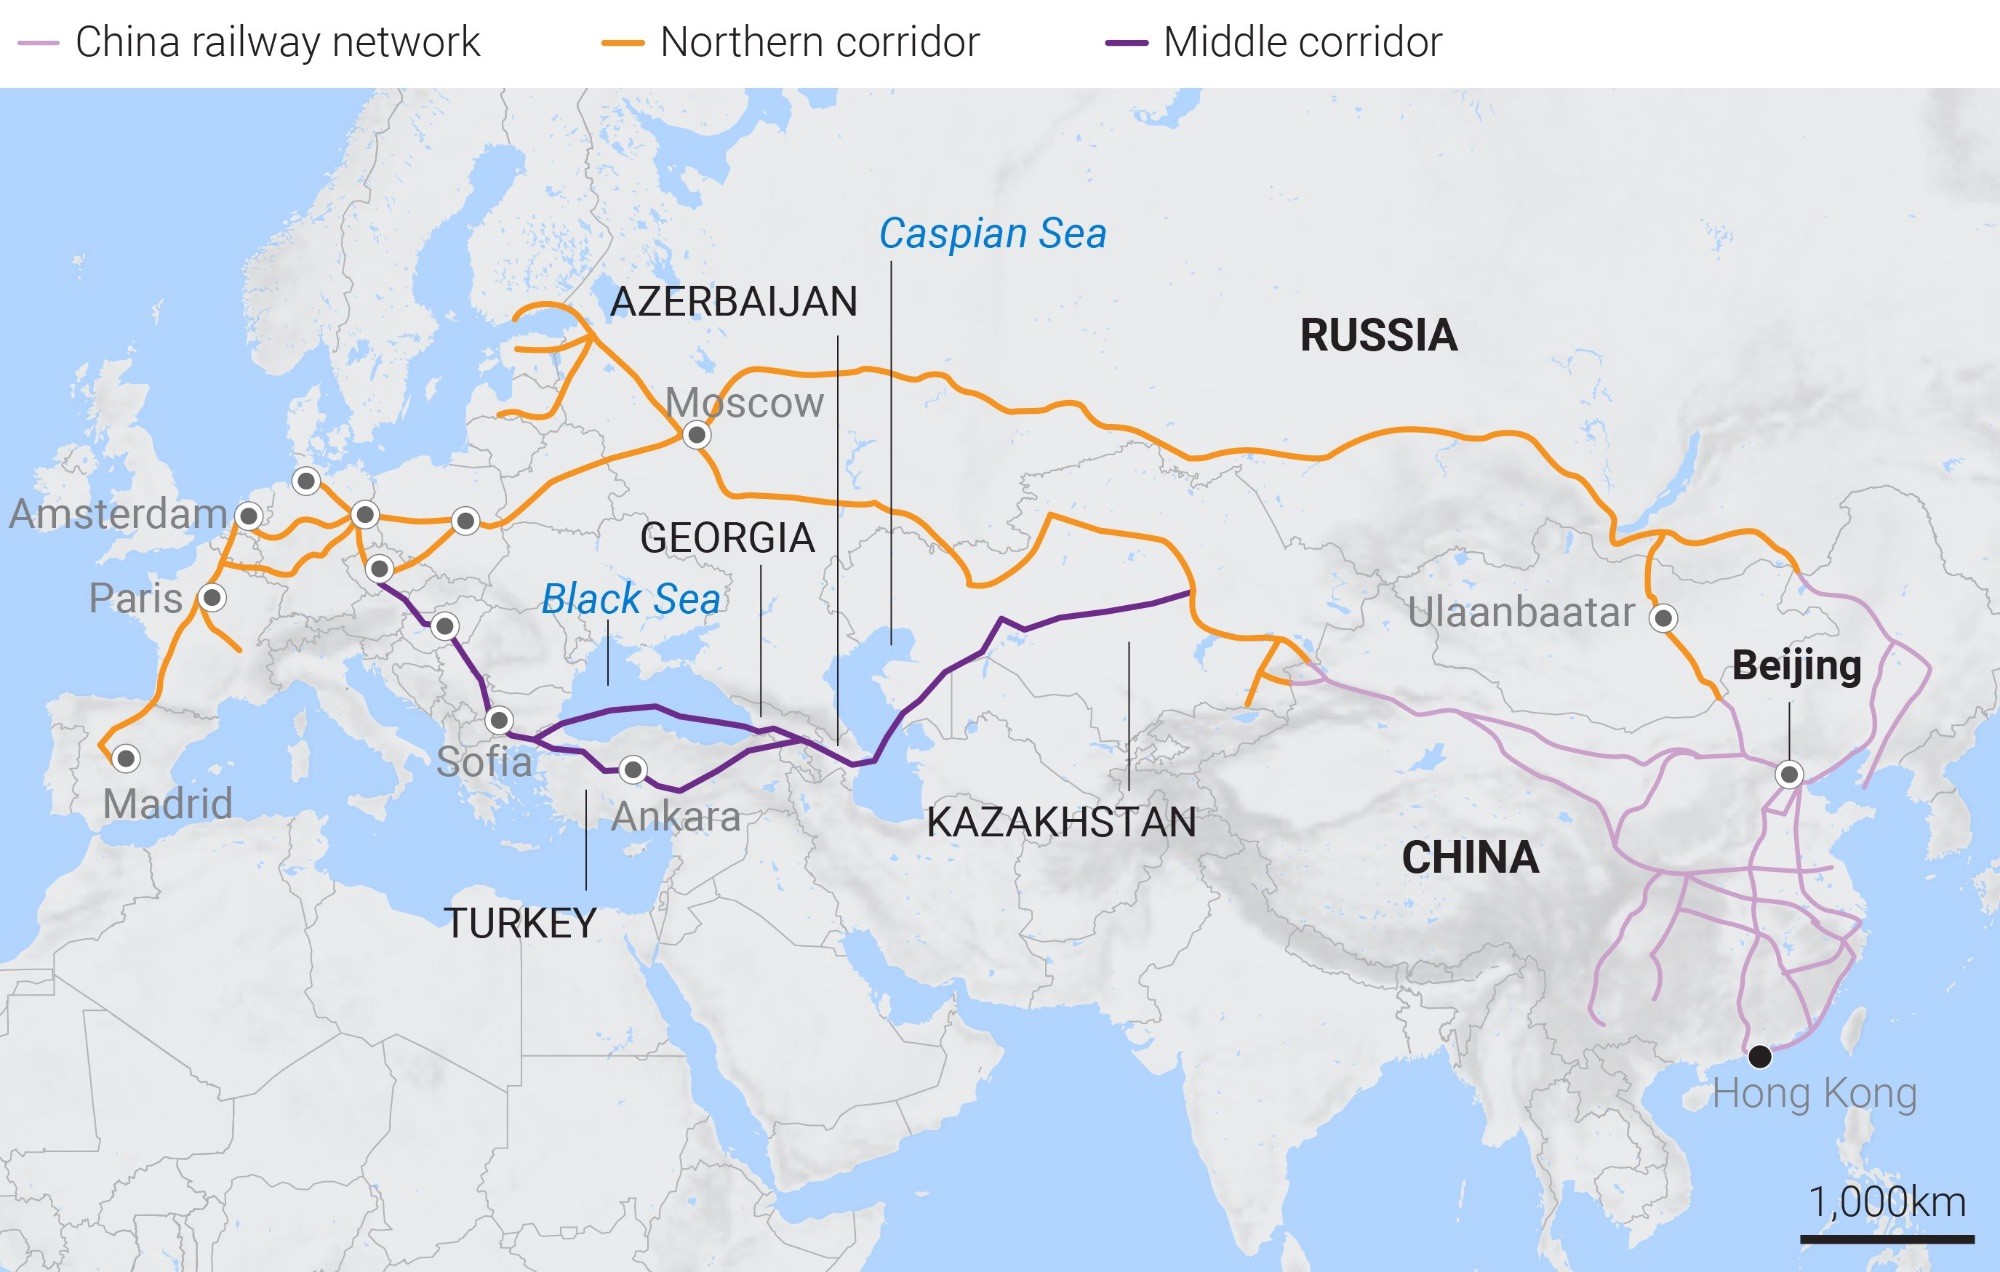 Cargo volume by train between China and Europe drops due to Ukraine war; Caspian Sea route could avoid Russia